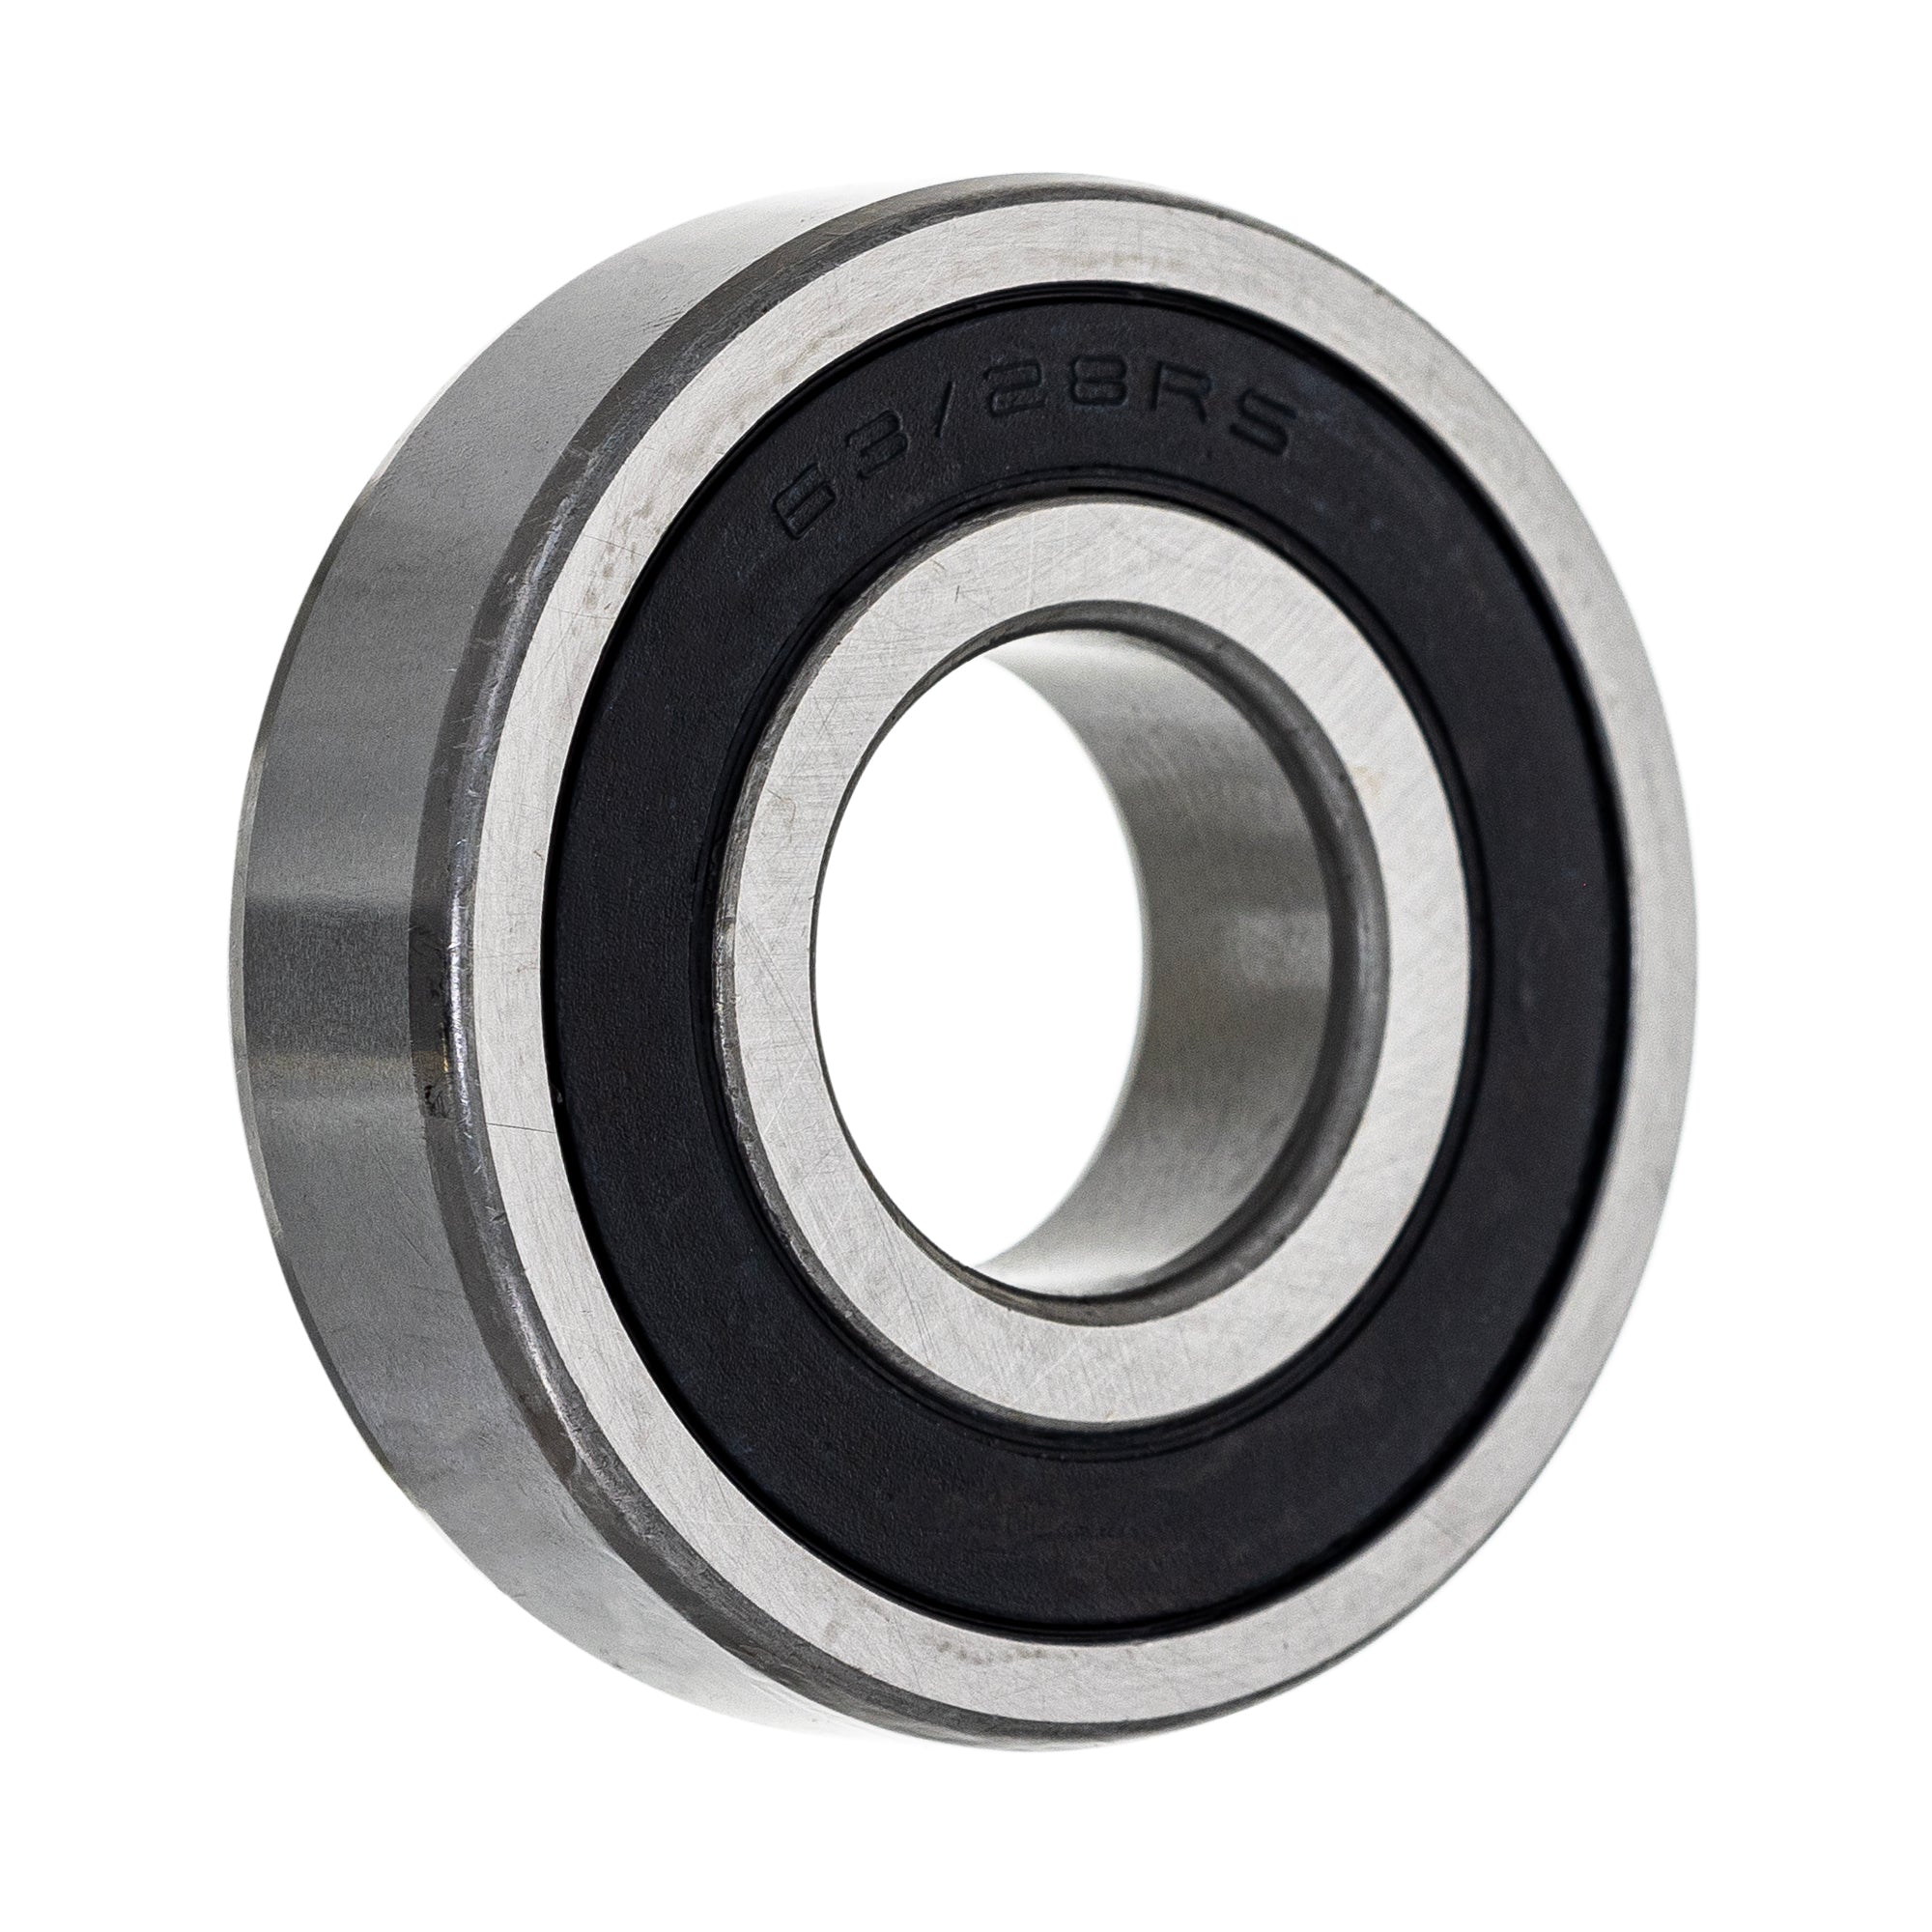 NICHE Bearing 10-Pack 91051-MBR-003 91002-KY0-981